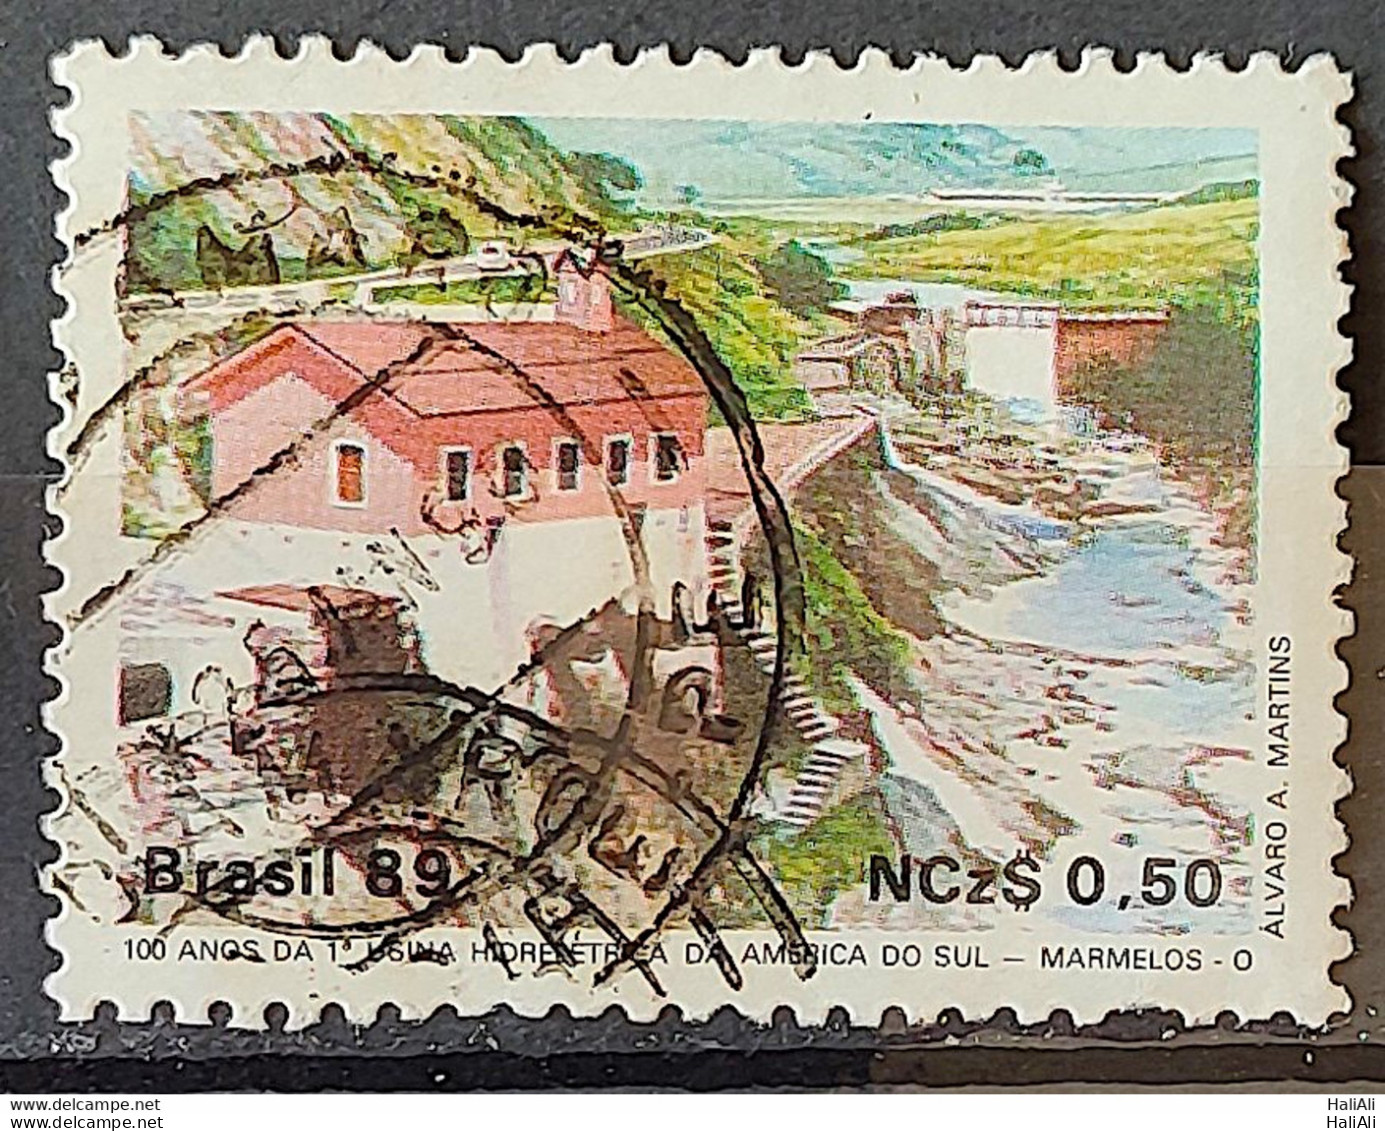 C 1644 Brazil Stamp 100 Years Hydroelectric Marmelos Energy Electricity Juiz De Fora 1989 Circulated 18 - Used Stamps